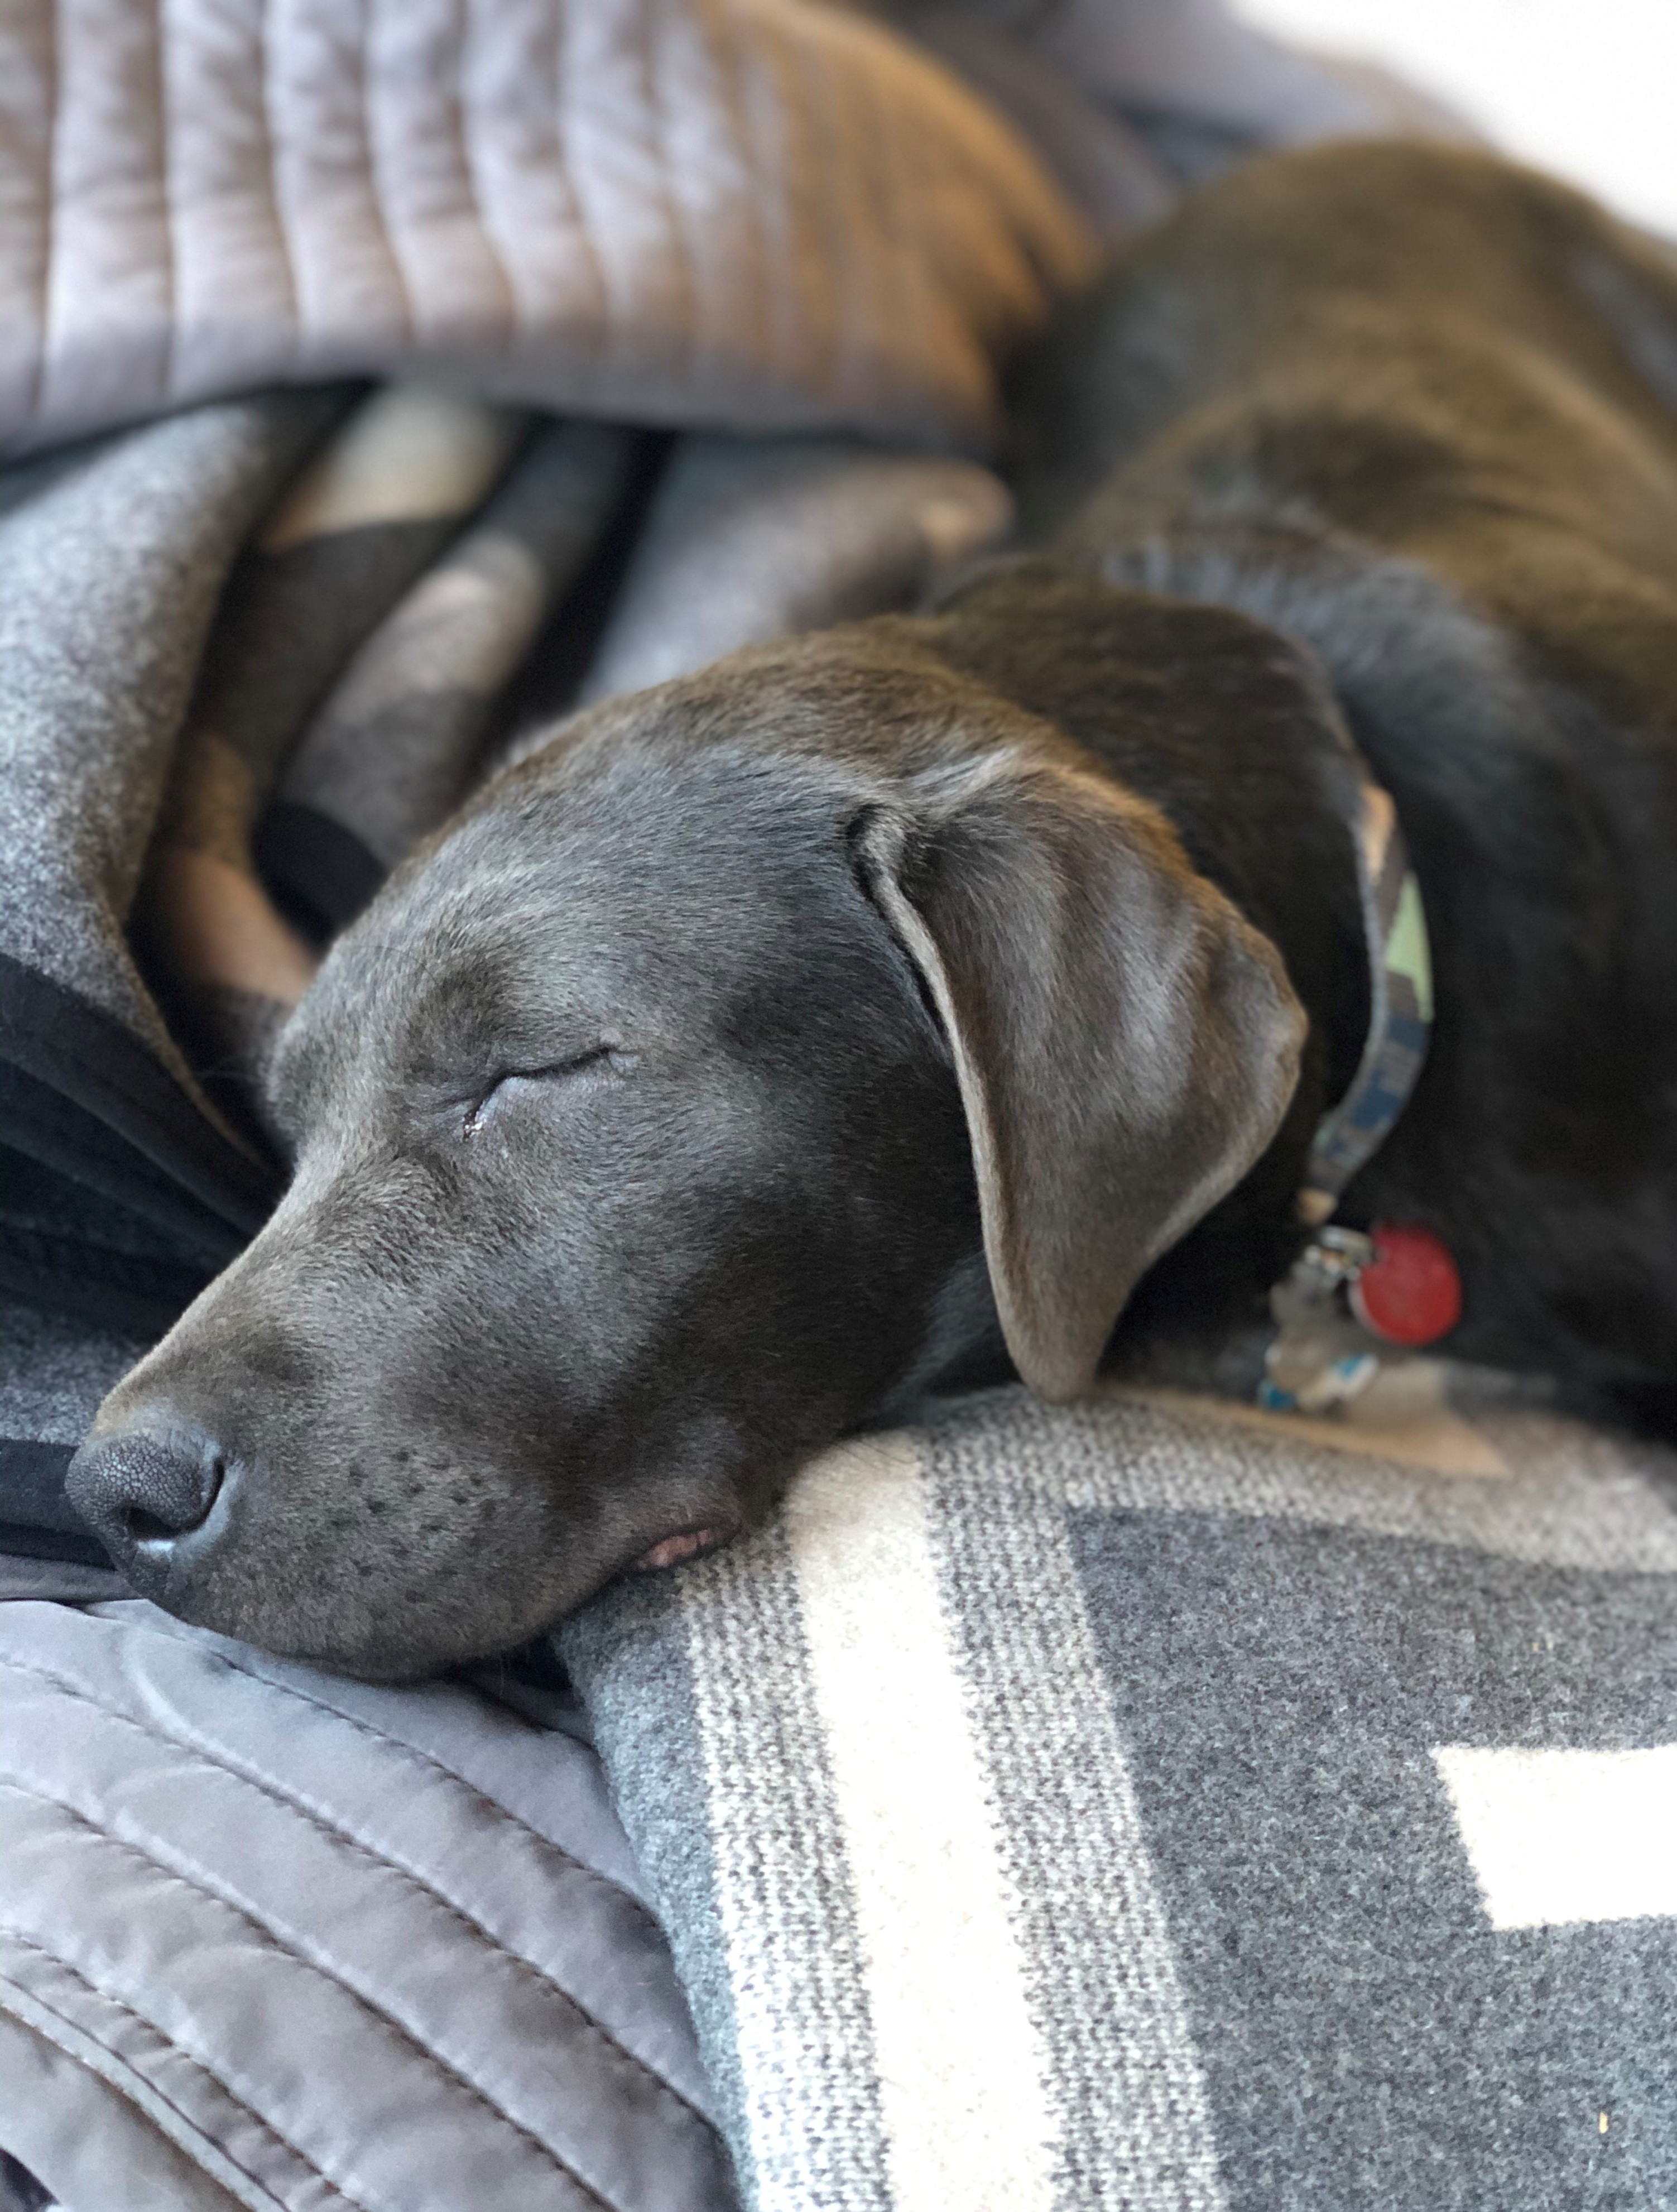 Photo of a sleepy Chocolate Labrador, sleeping very peacefully on top of a gray and white Pendleton blanket.